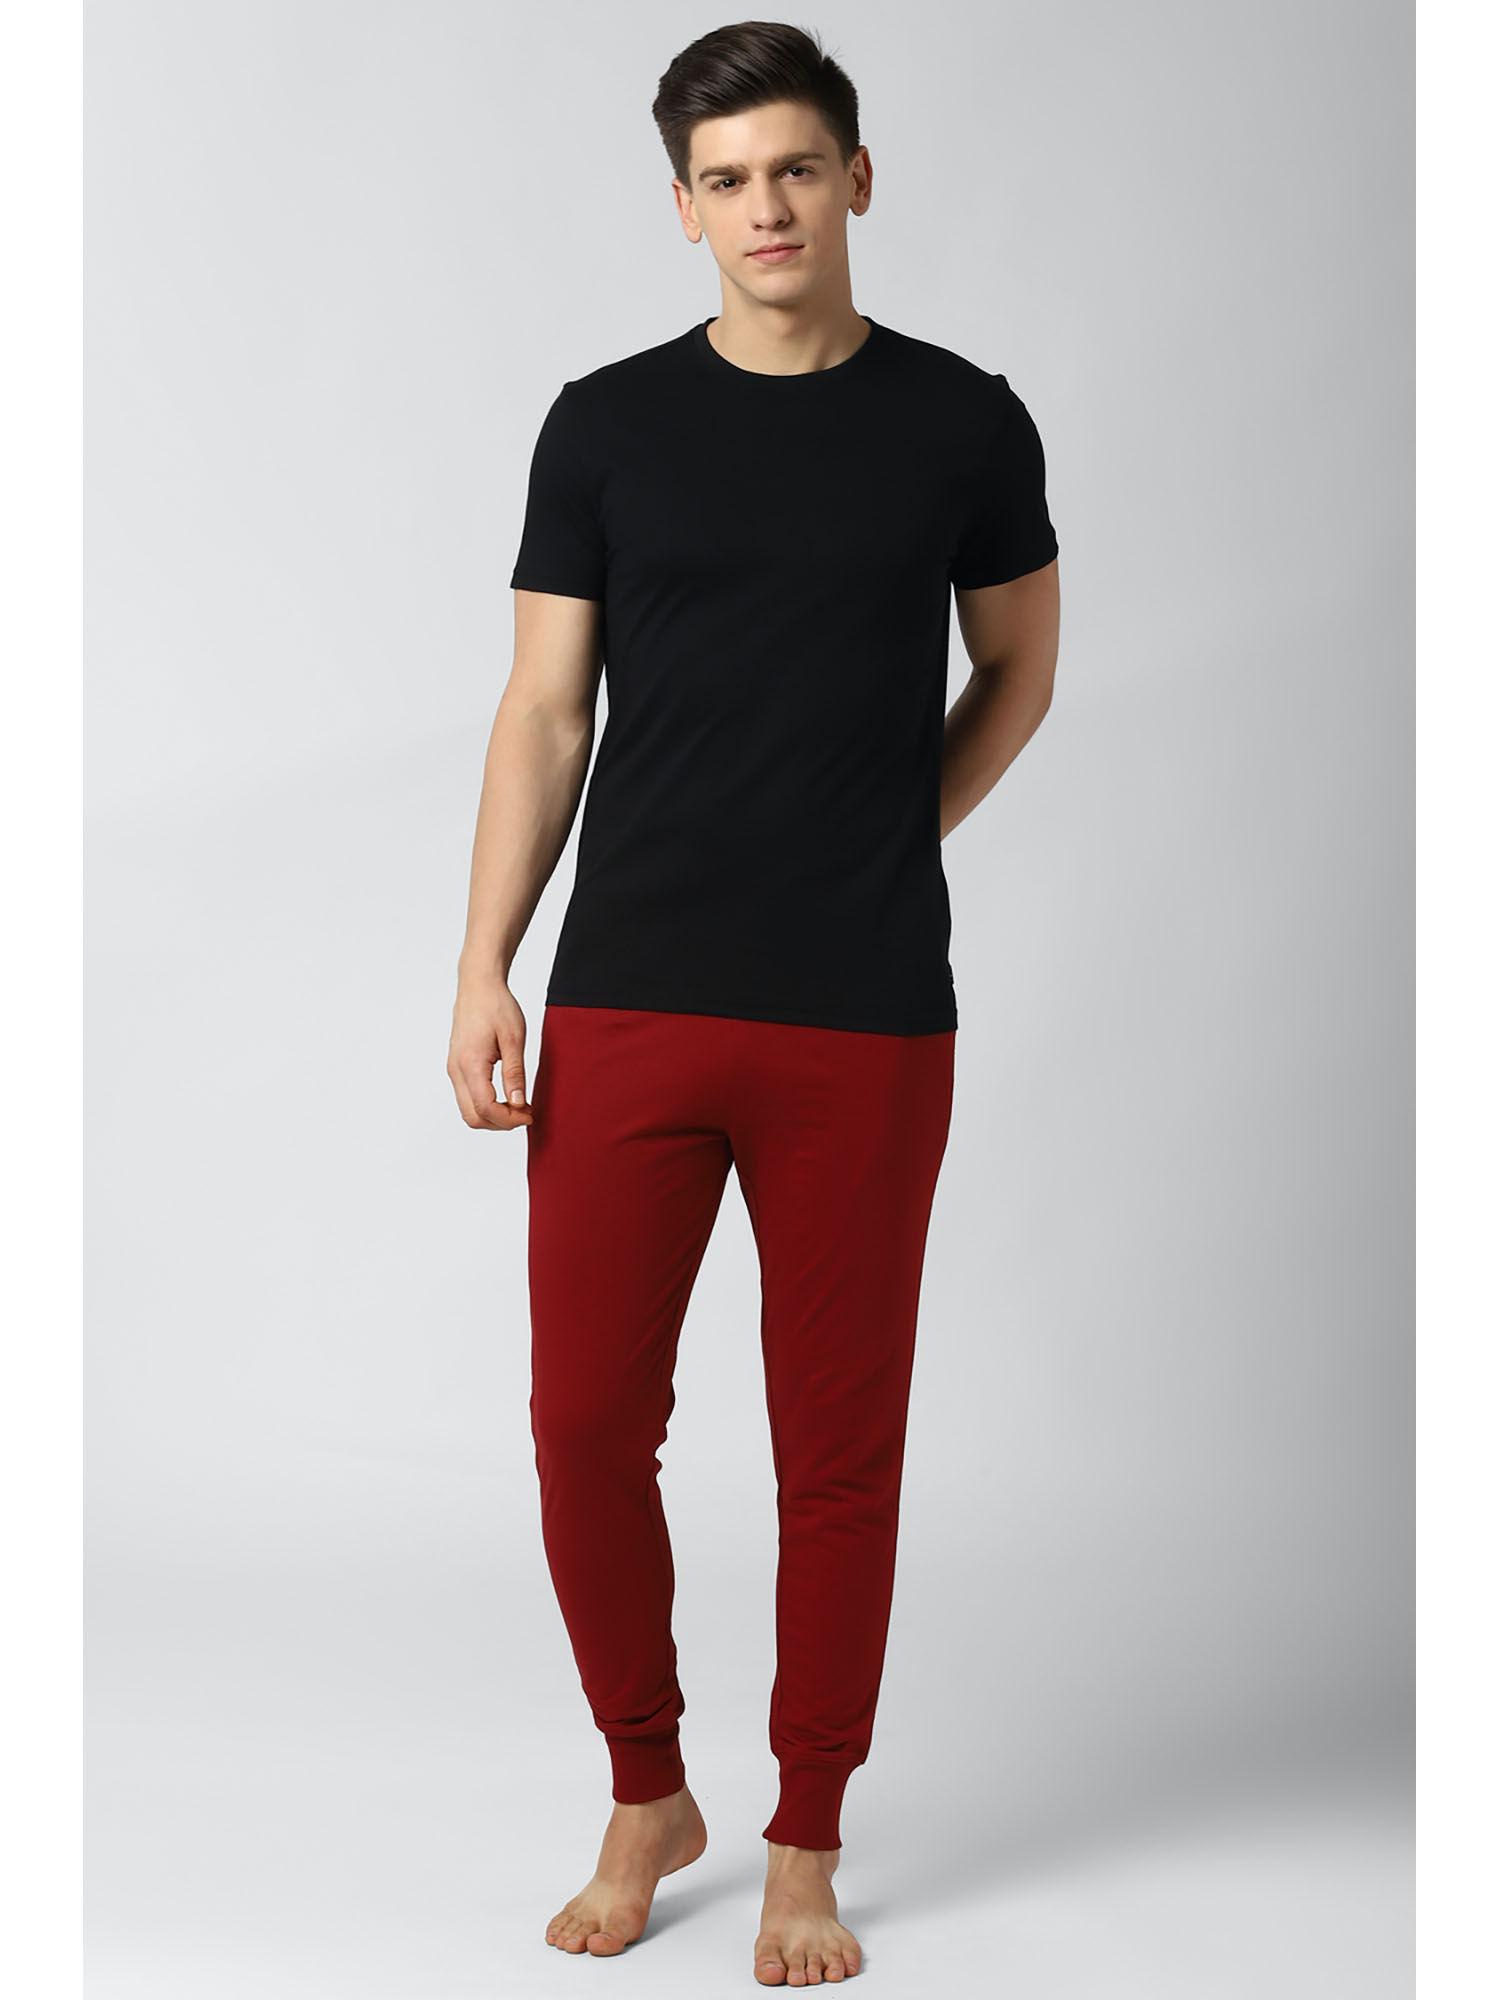 black-t-shirt-and-joggers-(set-of-2)